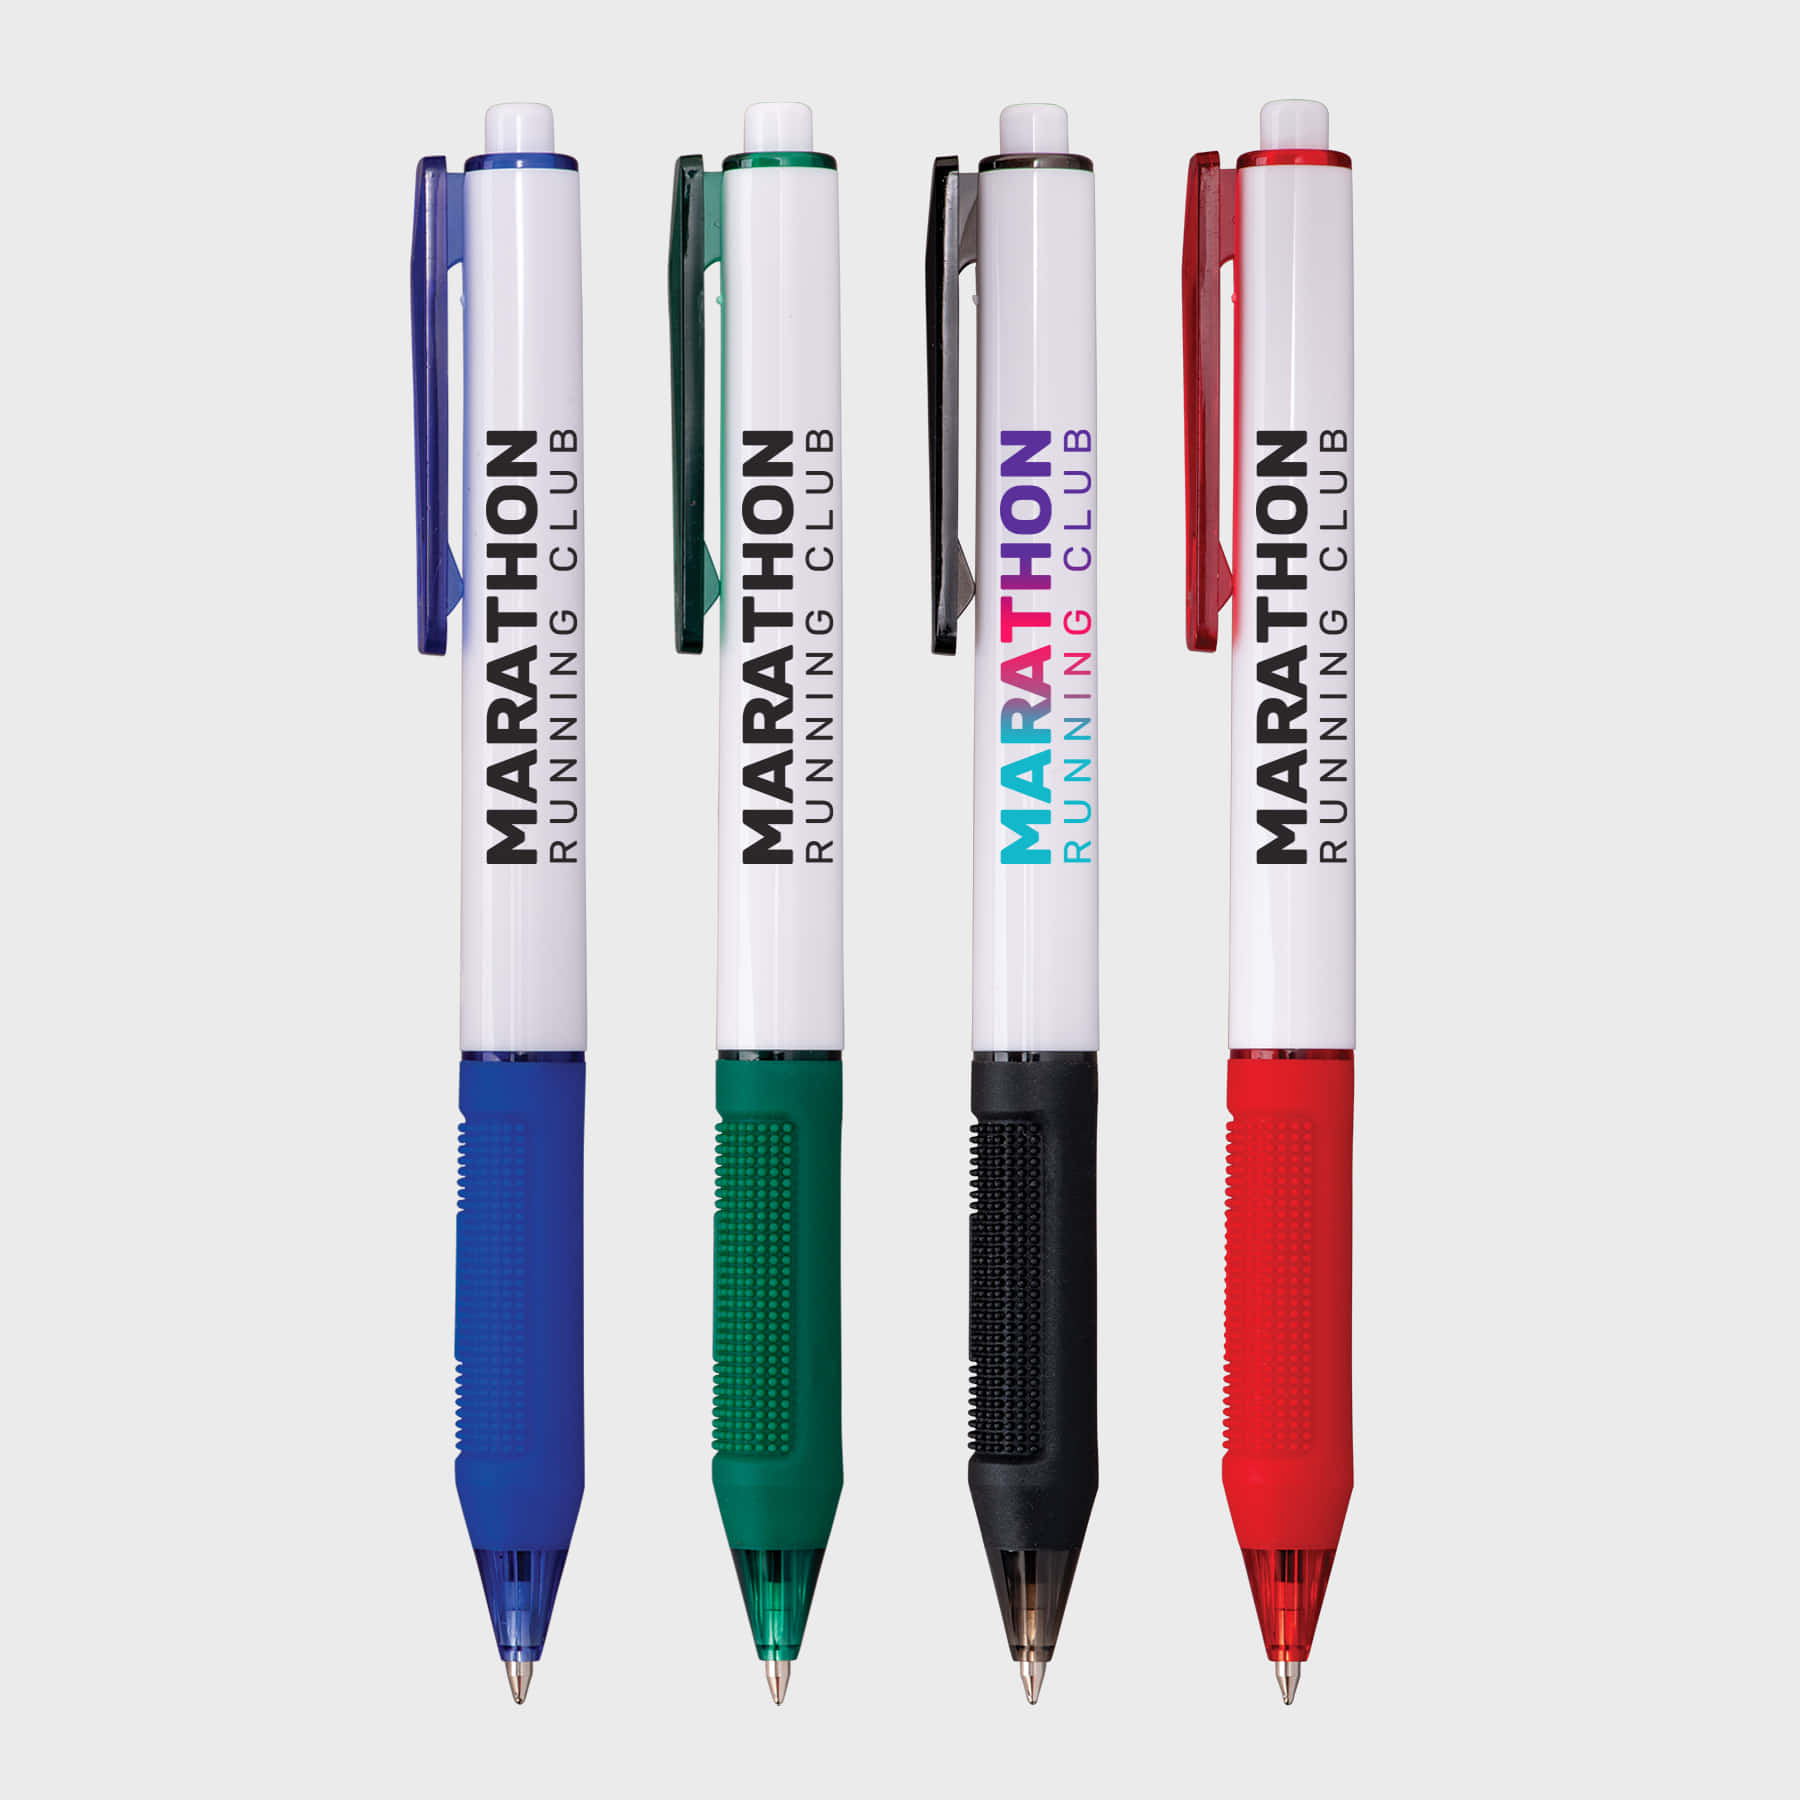 Four Pens With The Word Marathon On Them